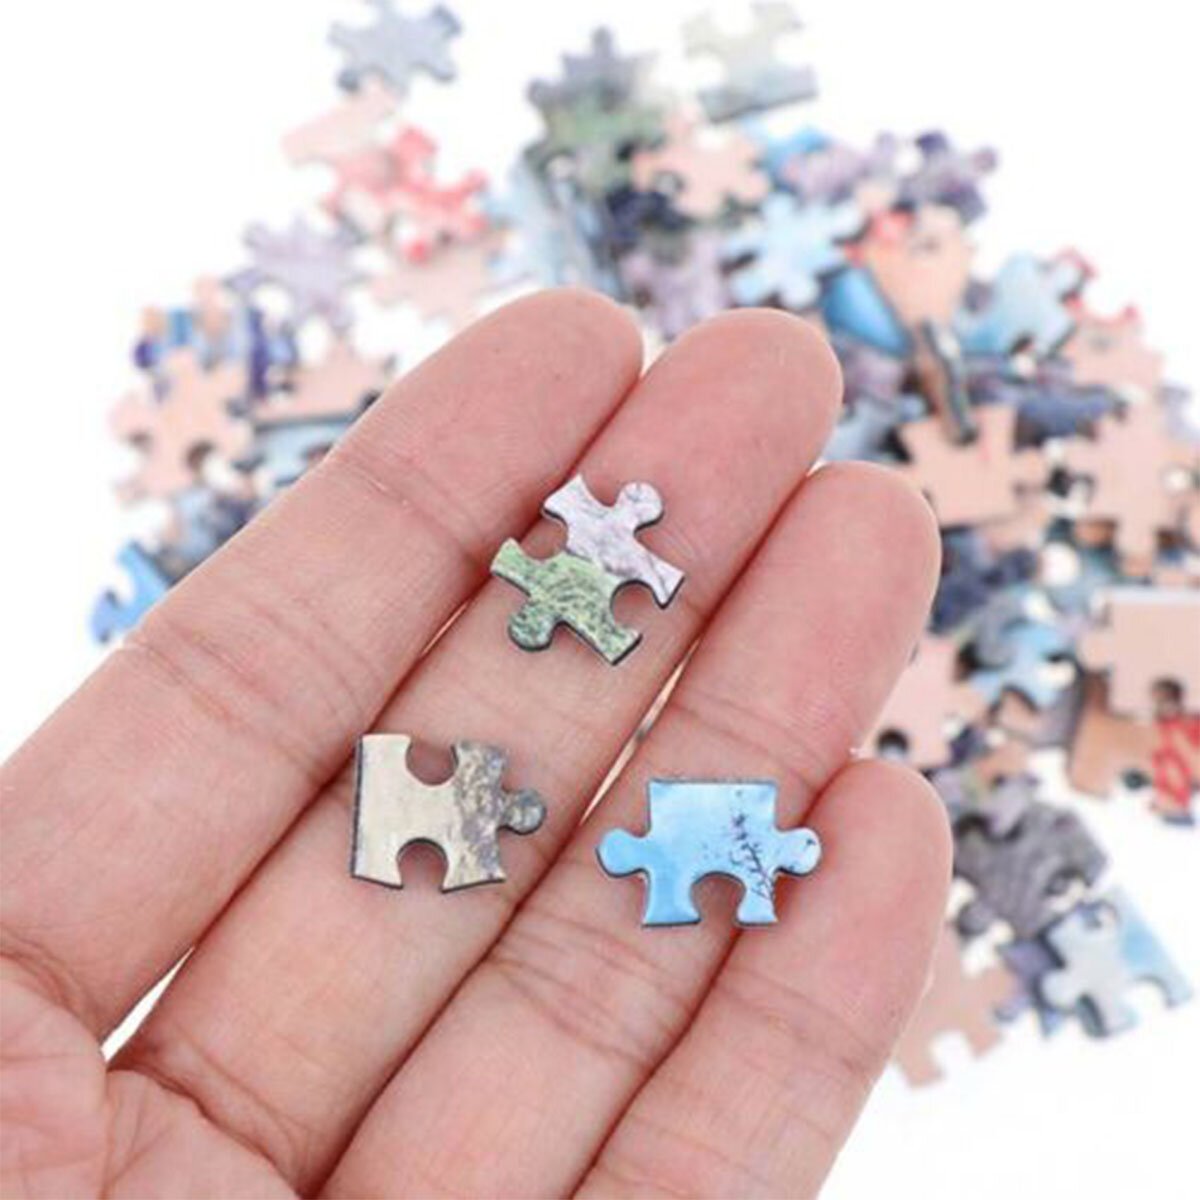 1000 Piece Jigsaw Puzzle Toy DIY Assembly Cardboard Landscapes Decompression Game